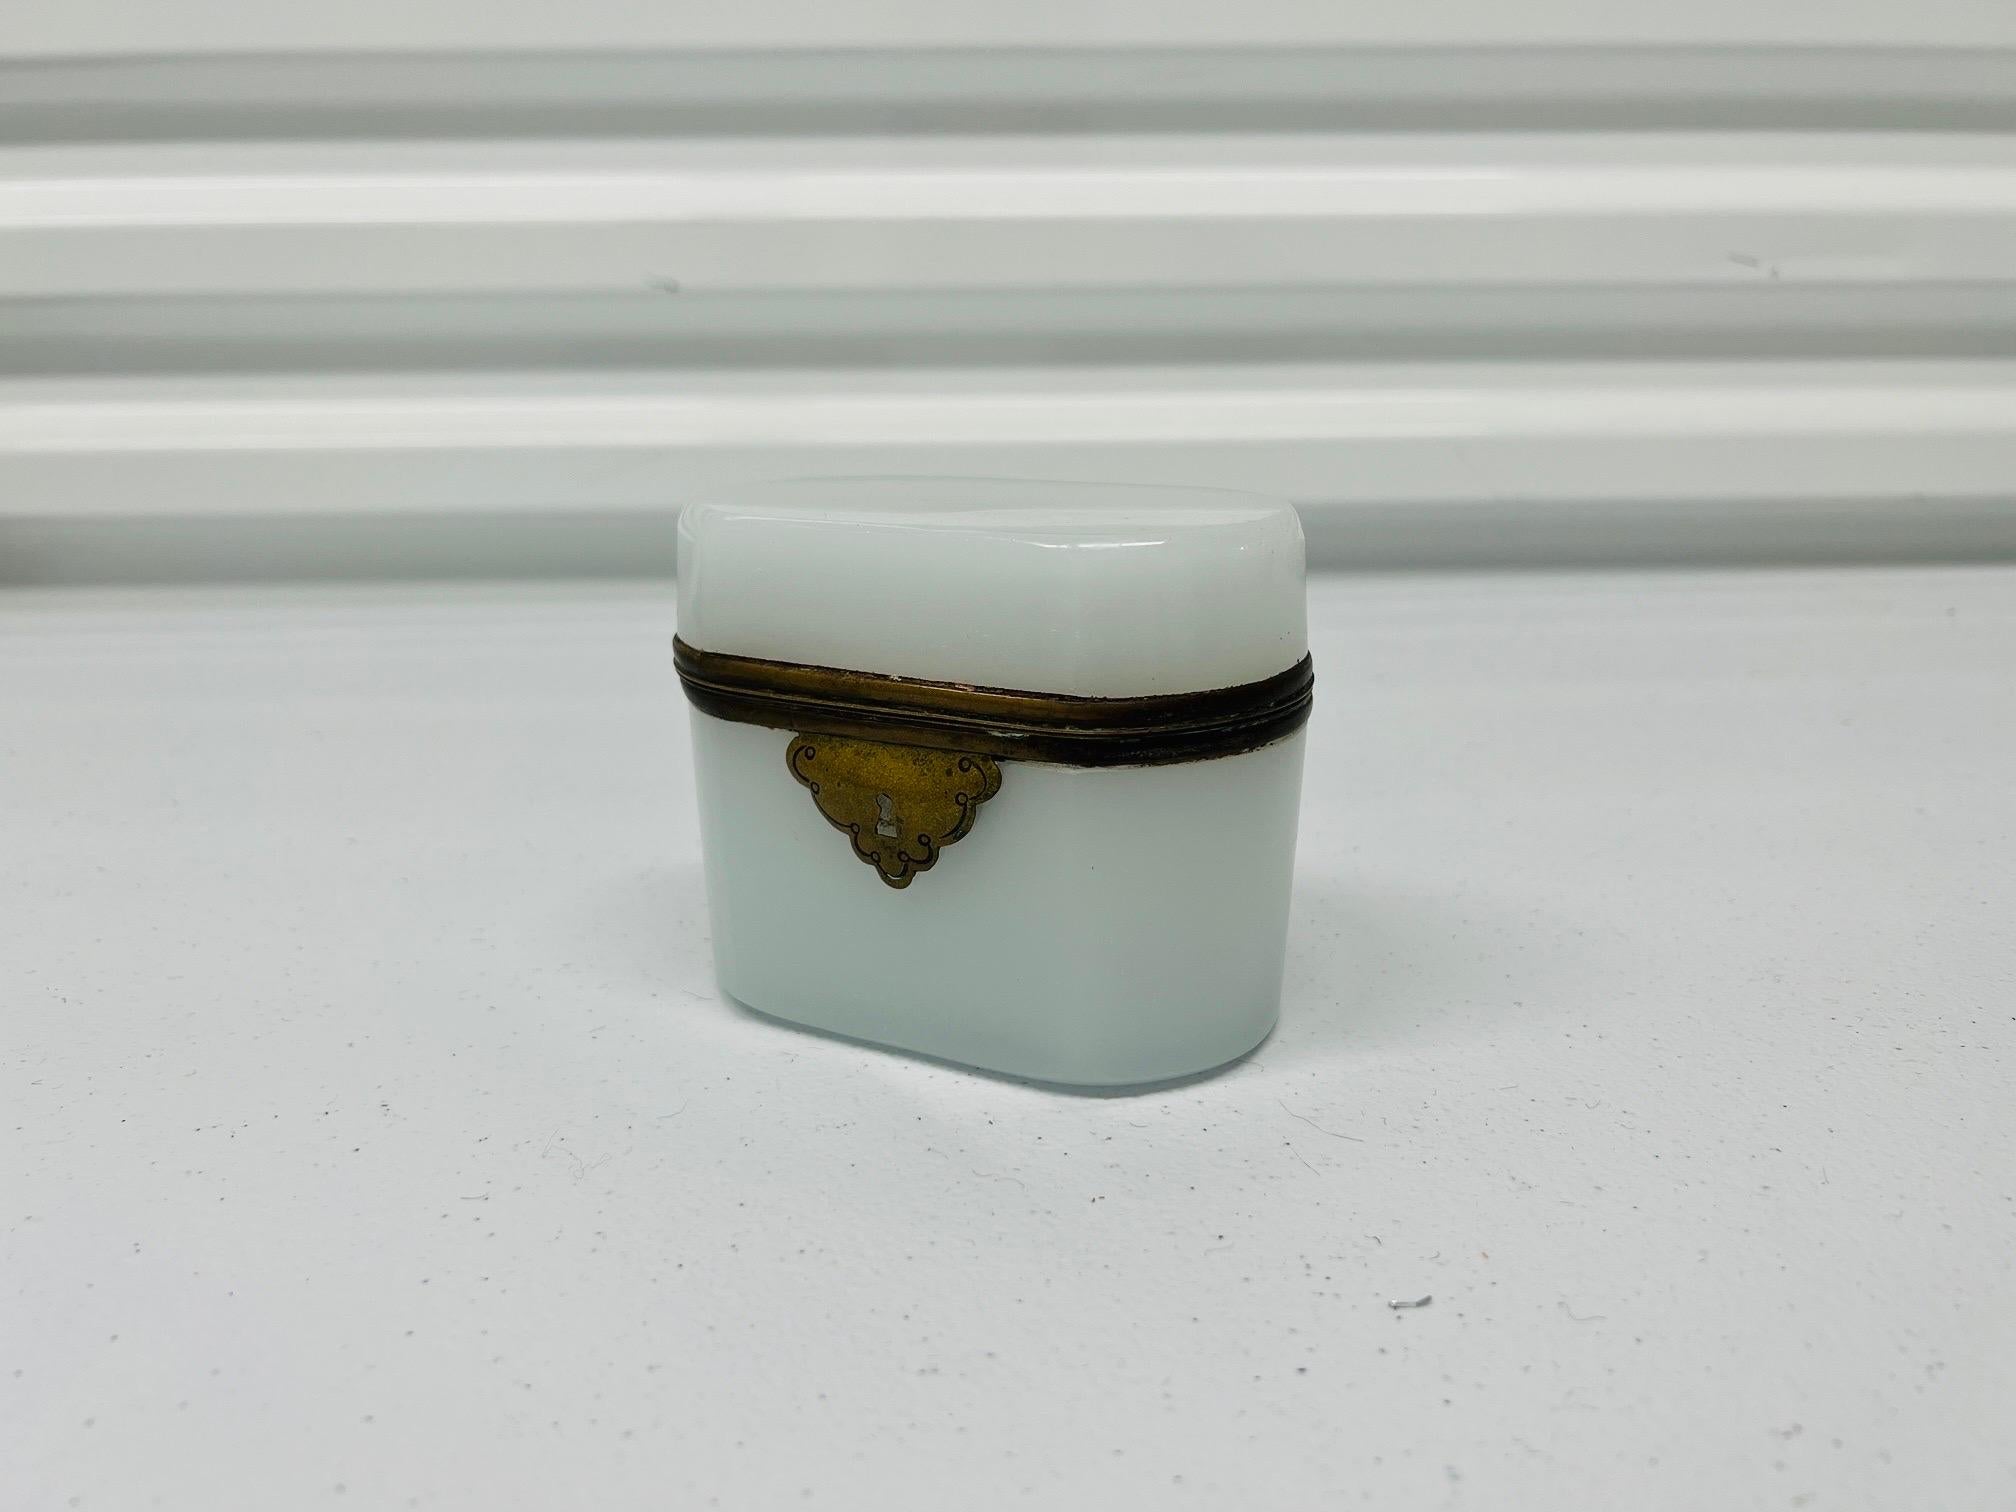 French, 19th century.

A good quality antique empire style white opaline box with silvered collar, hinged lid and a locking mechanism. Unmarked. 